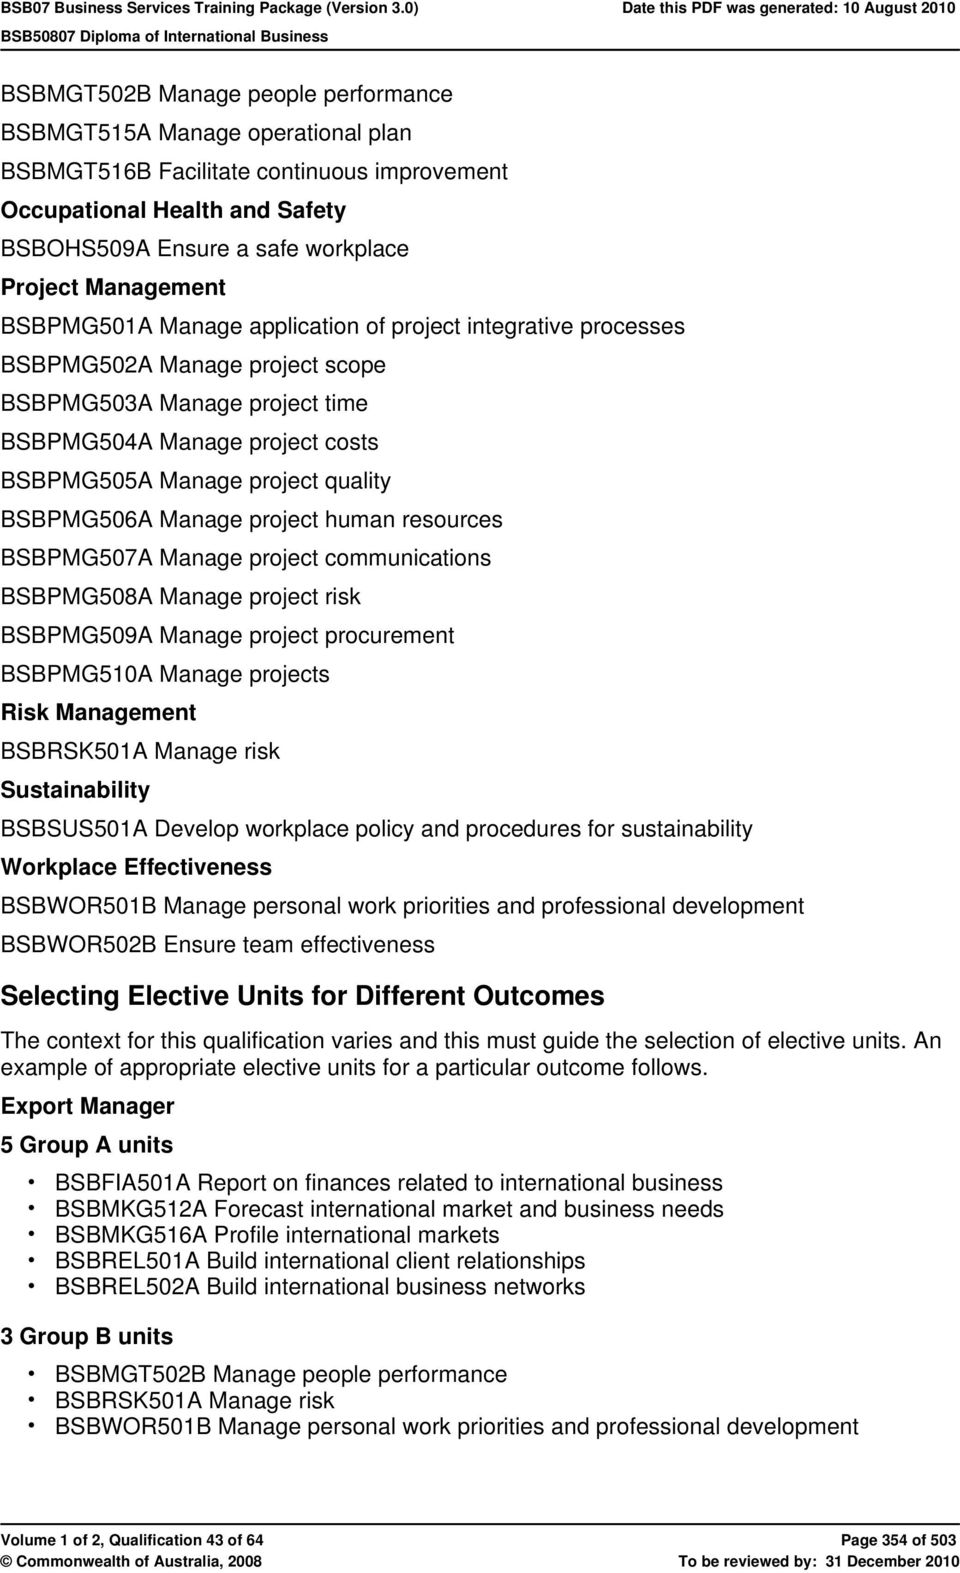 quality BSBPMG506A Manage project human resources BSBPMG507A Manage project communications BSBPMG508A Manage project risk BSBPMG509A Manage project procurement BSBPMG510A Manage projects Risk